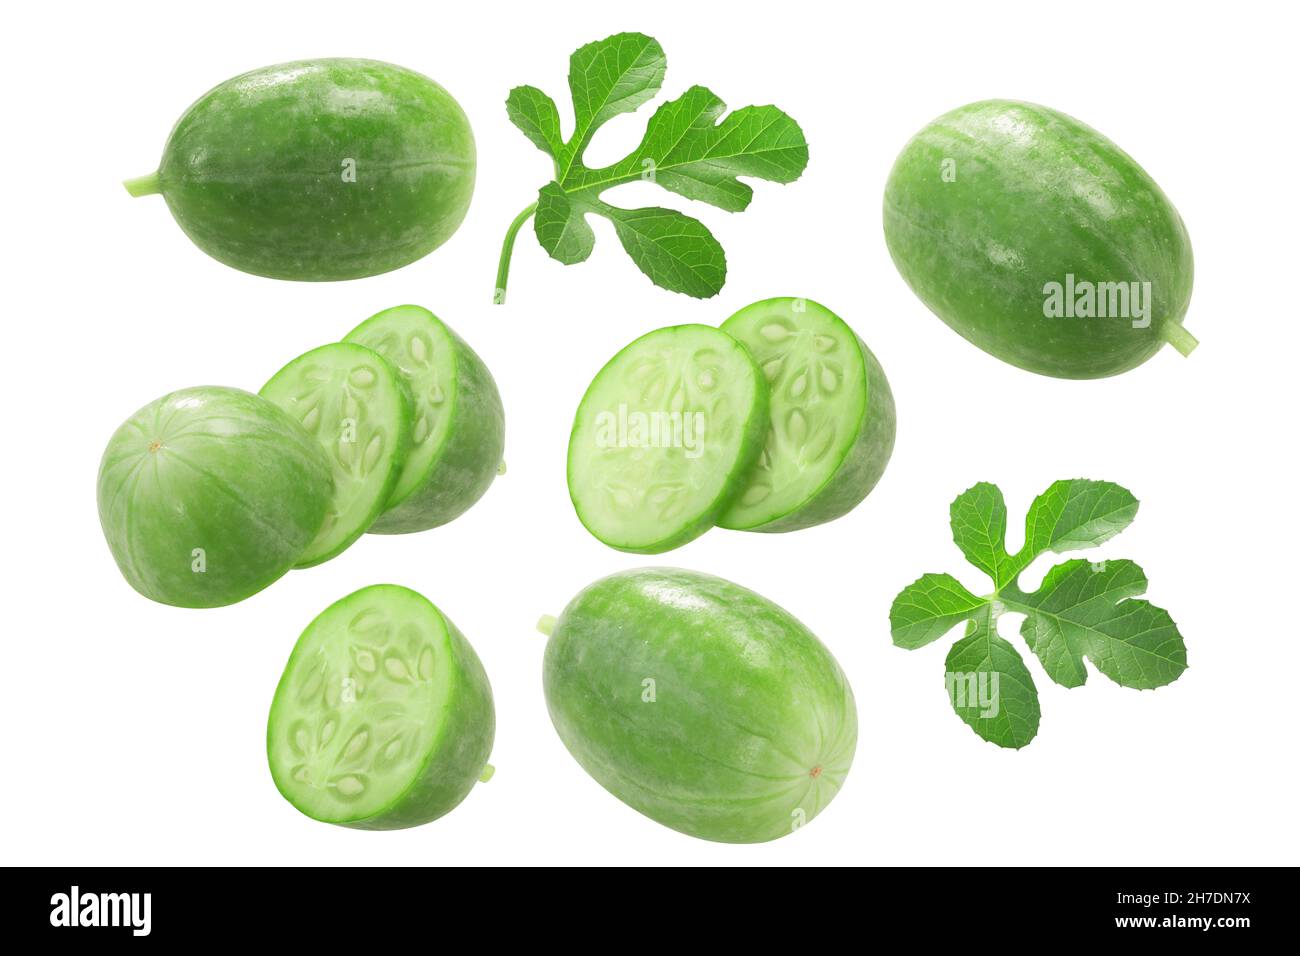 Maroon cucumber (Cucumis anguria) fruits and leaves isolated Stock Photo